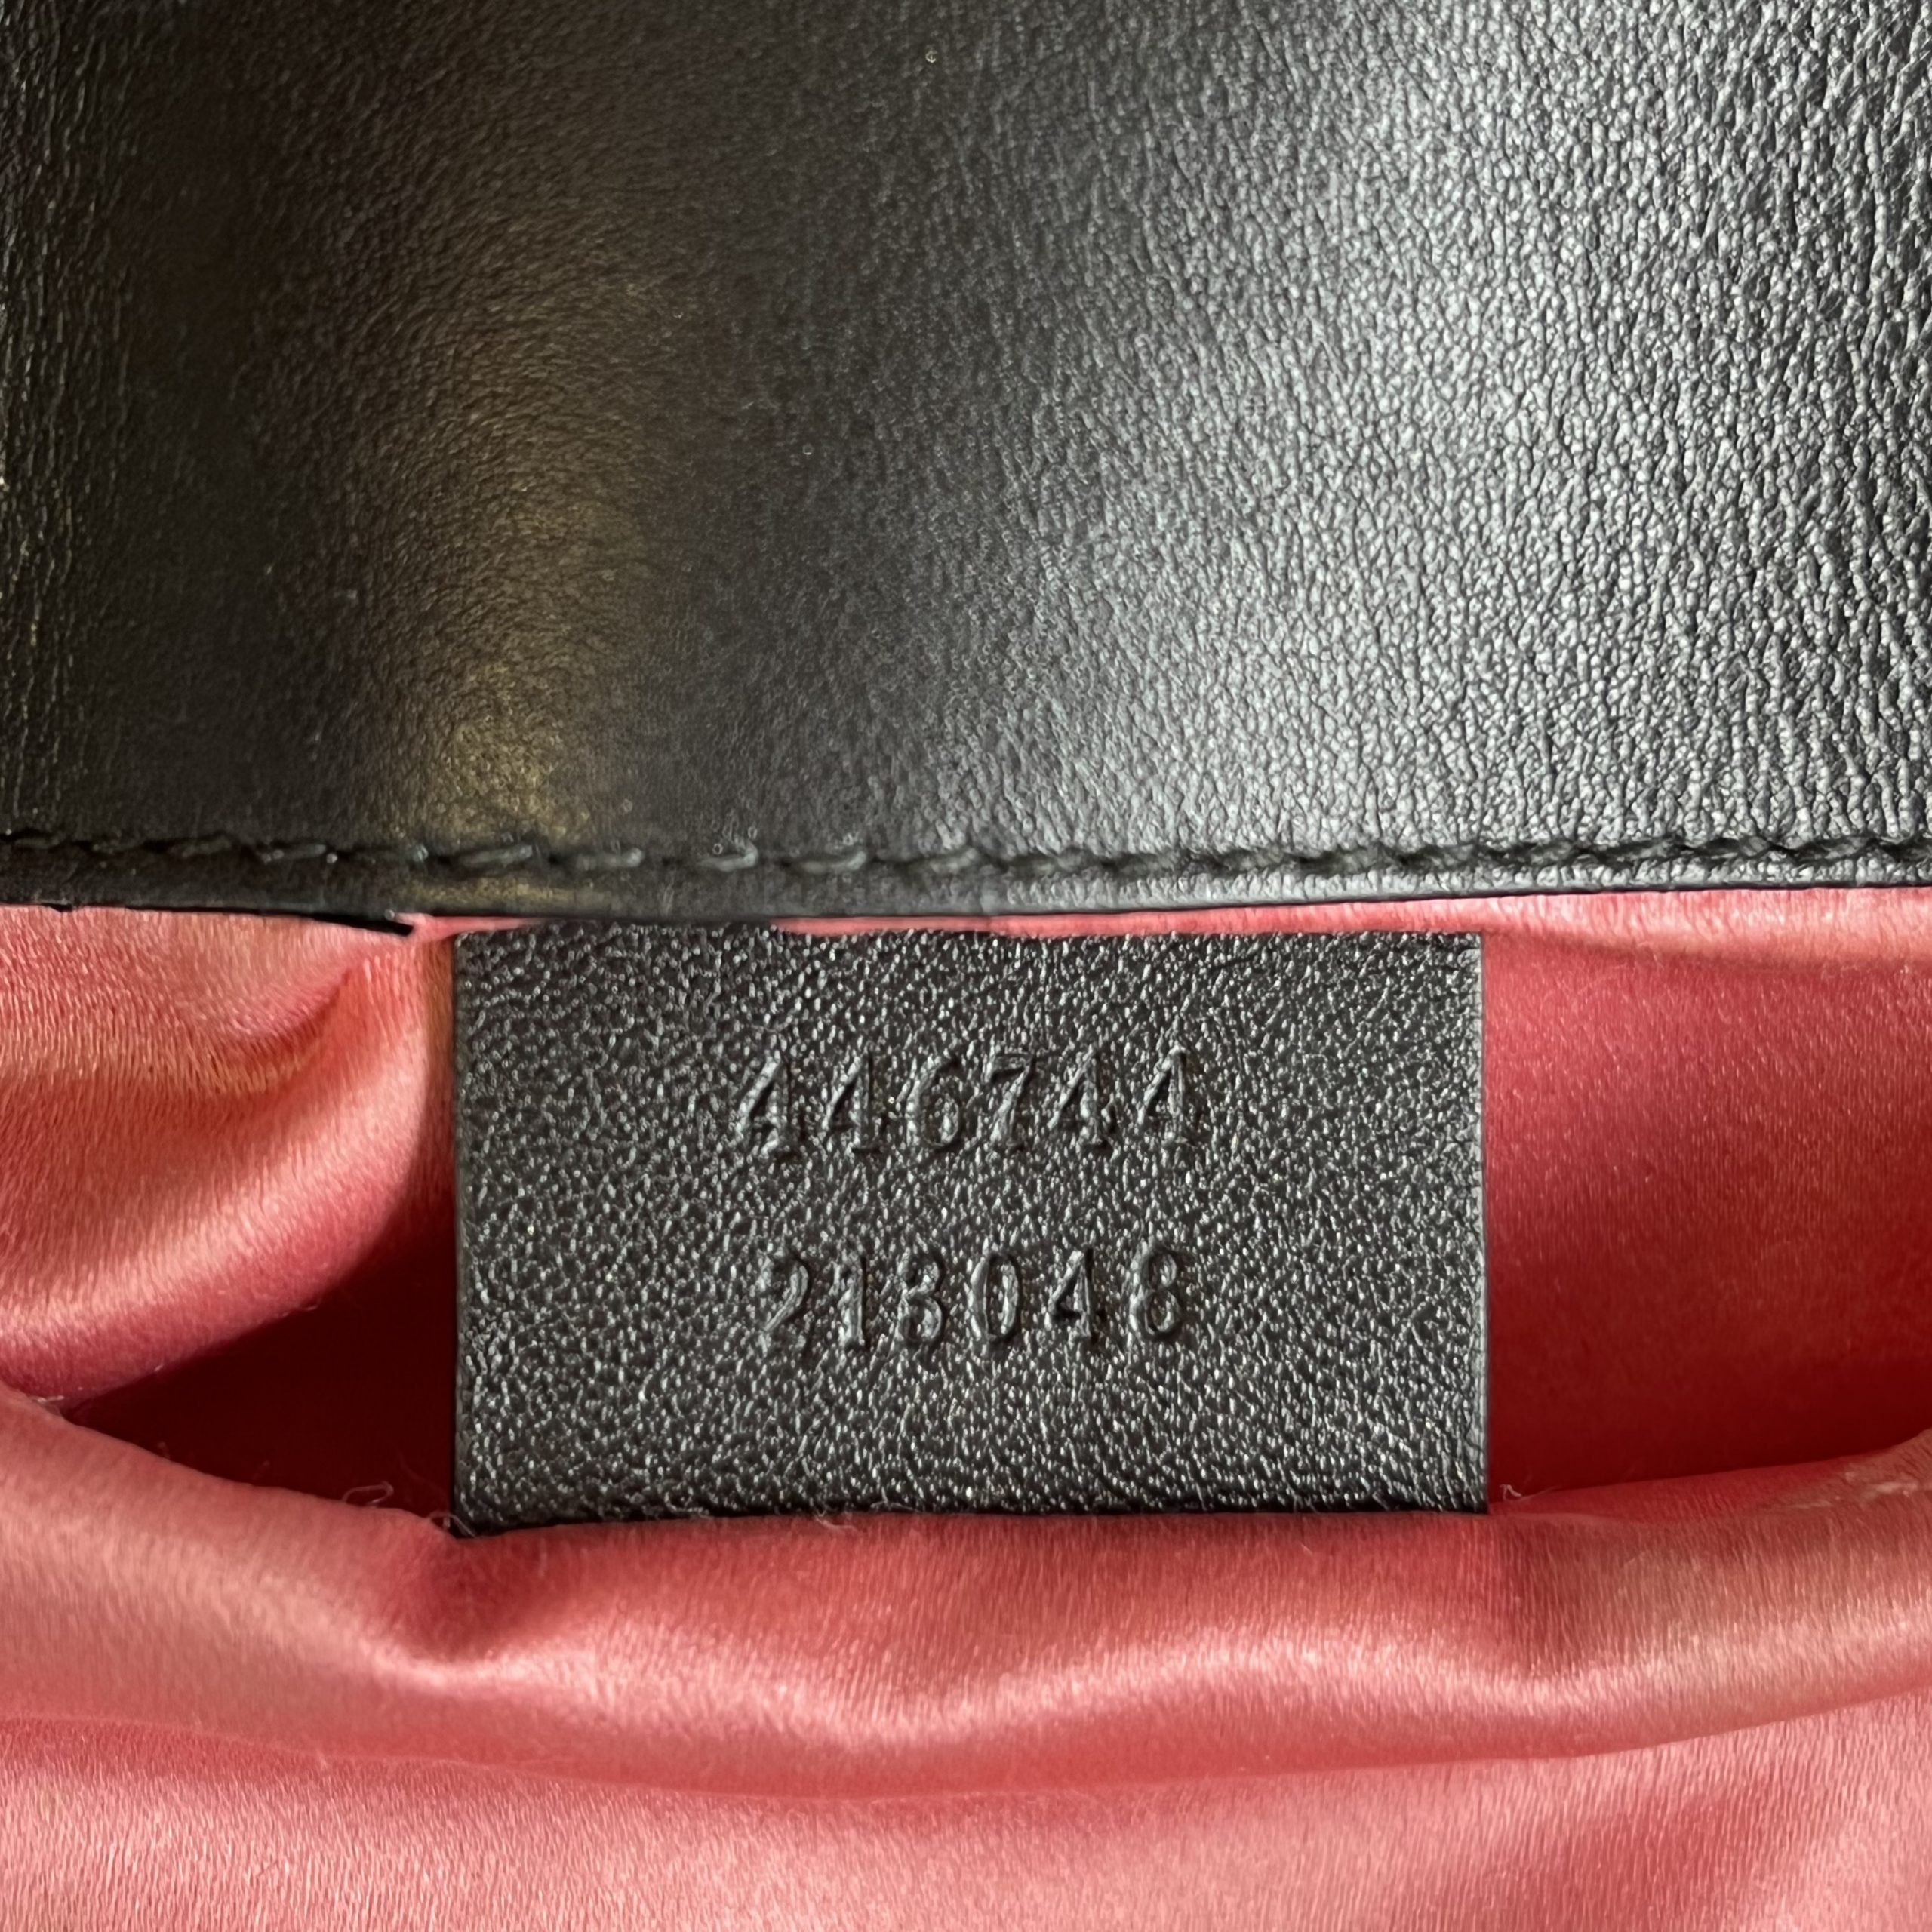 A GUIDE TO GUCCI SERIAL NUMBERS